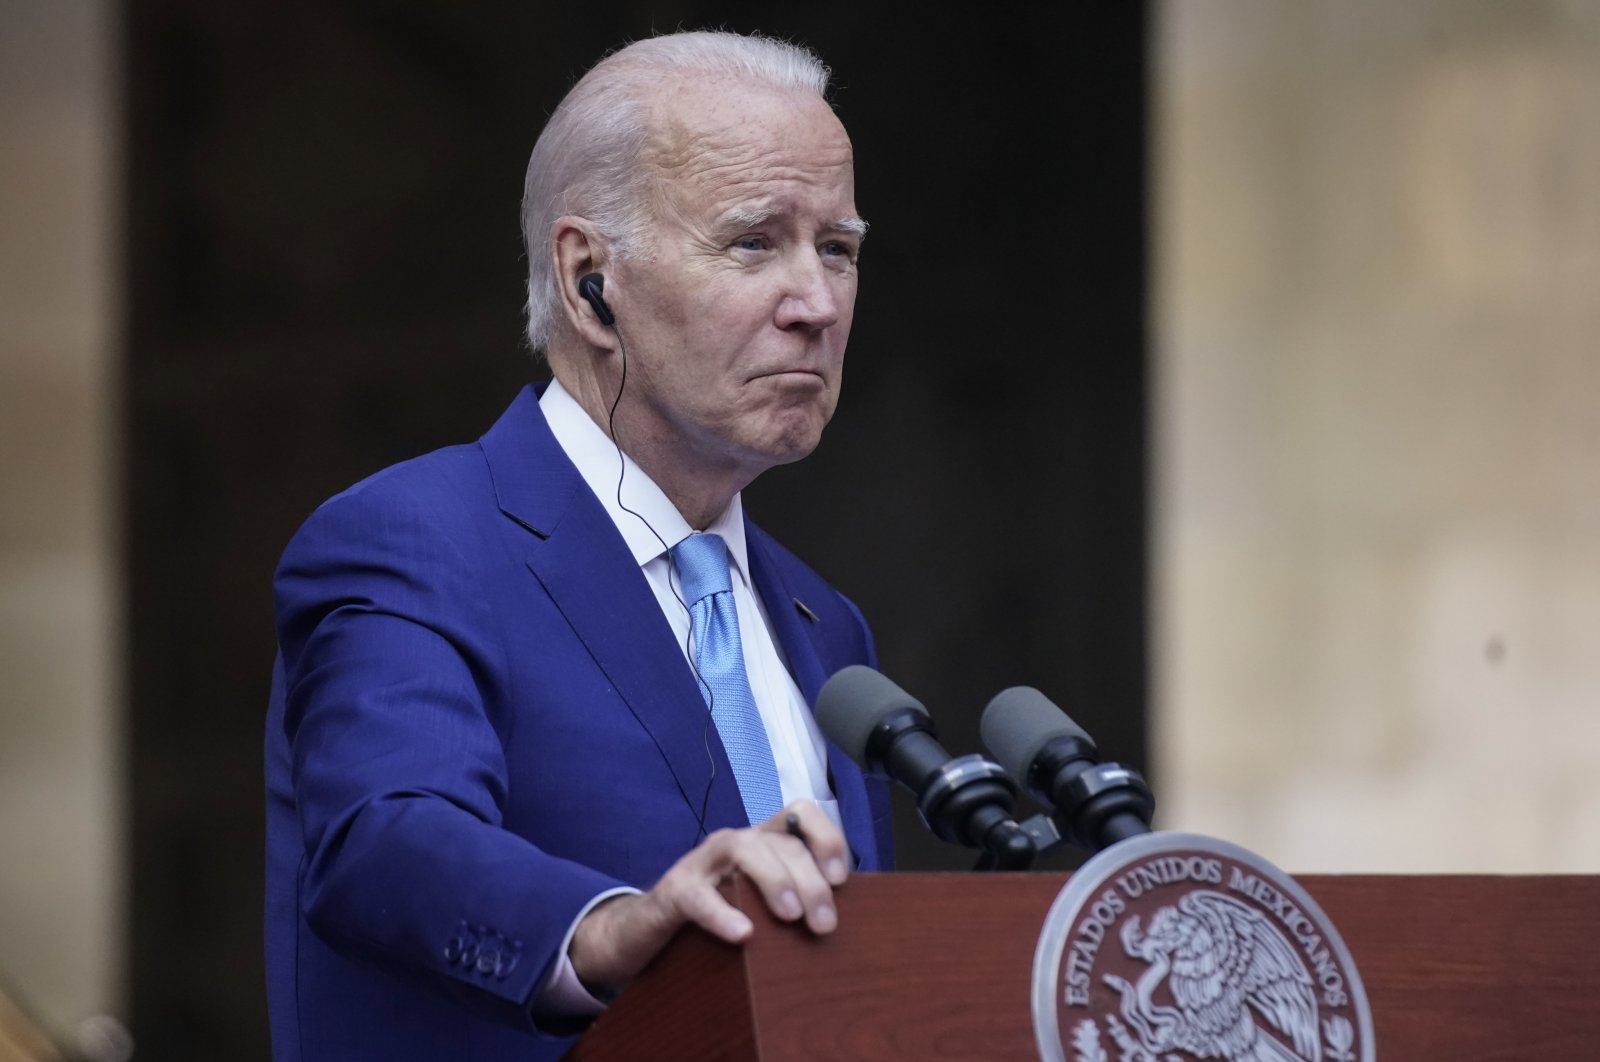 President Joe Biden listens during a news conference in Mexico City, Mexico, Jan. 10, 2023. (AP Photo)